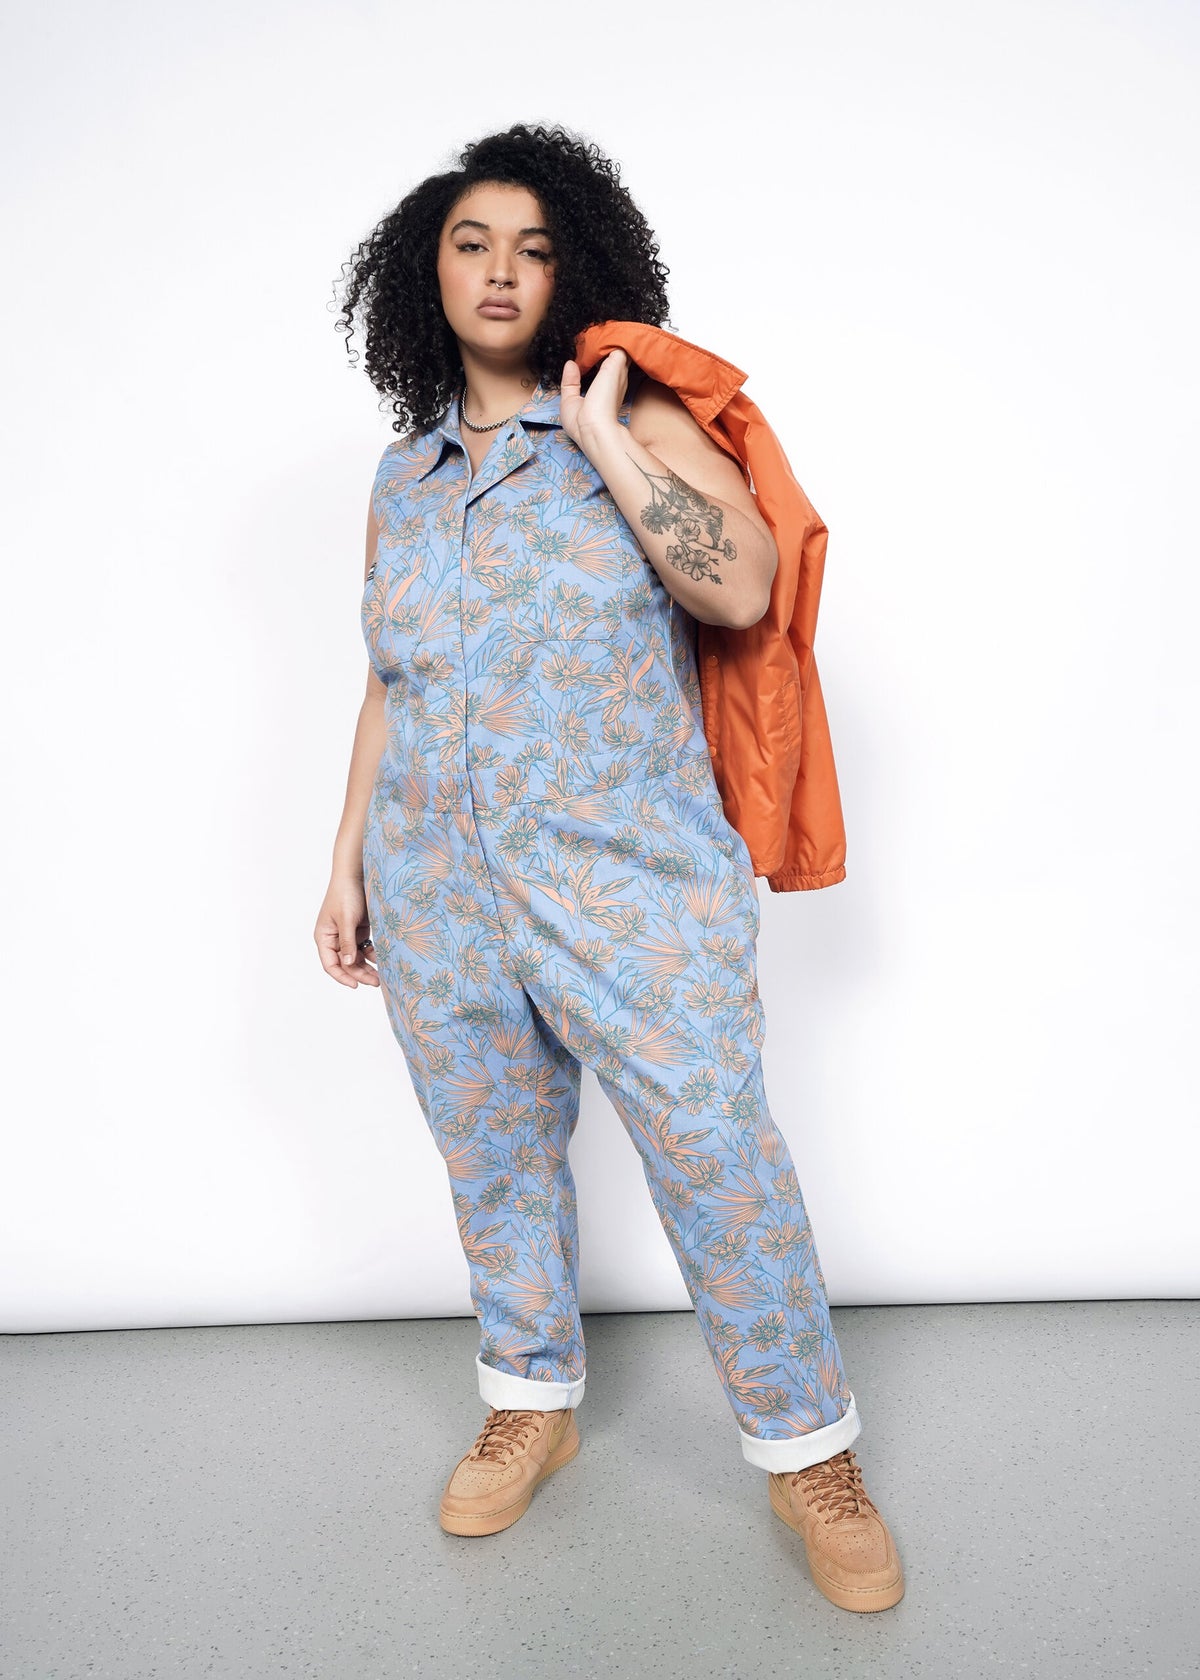 Model wearing the Essential Sleeveless Coverall in Flower Press Periwinkle in size XL with tan shoes and an orange jacket slung over shoulder